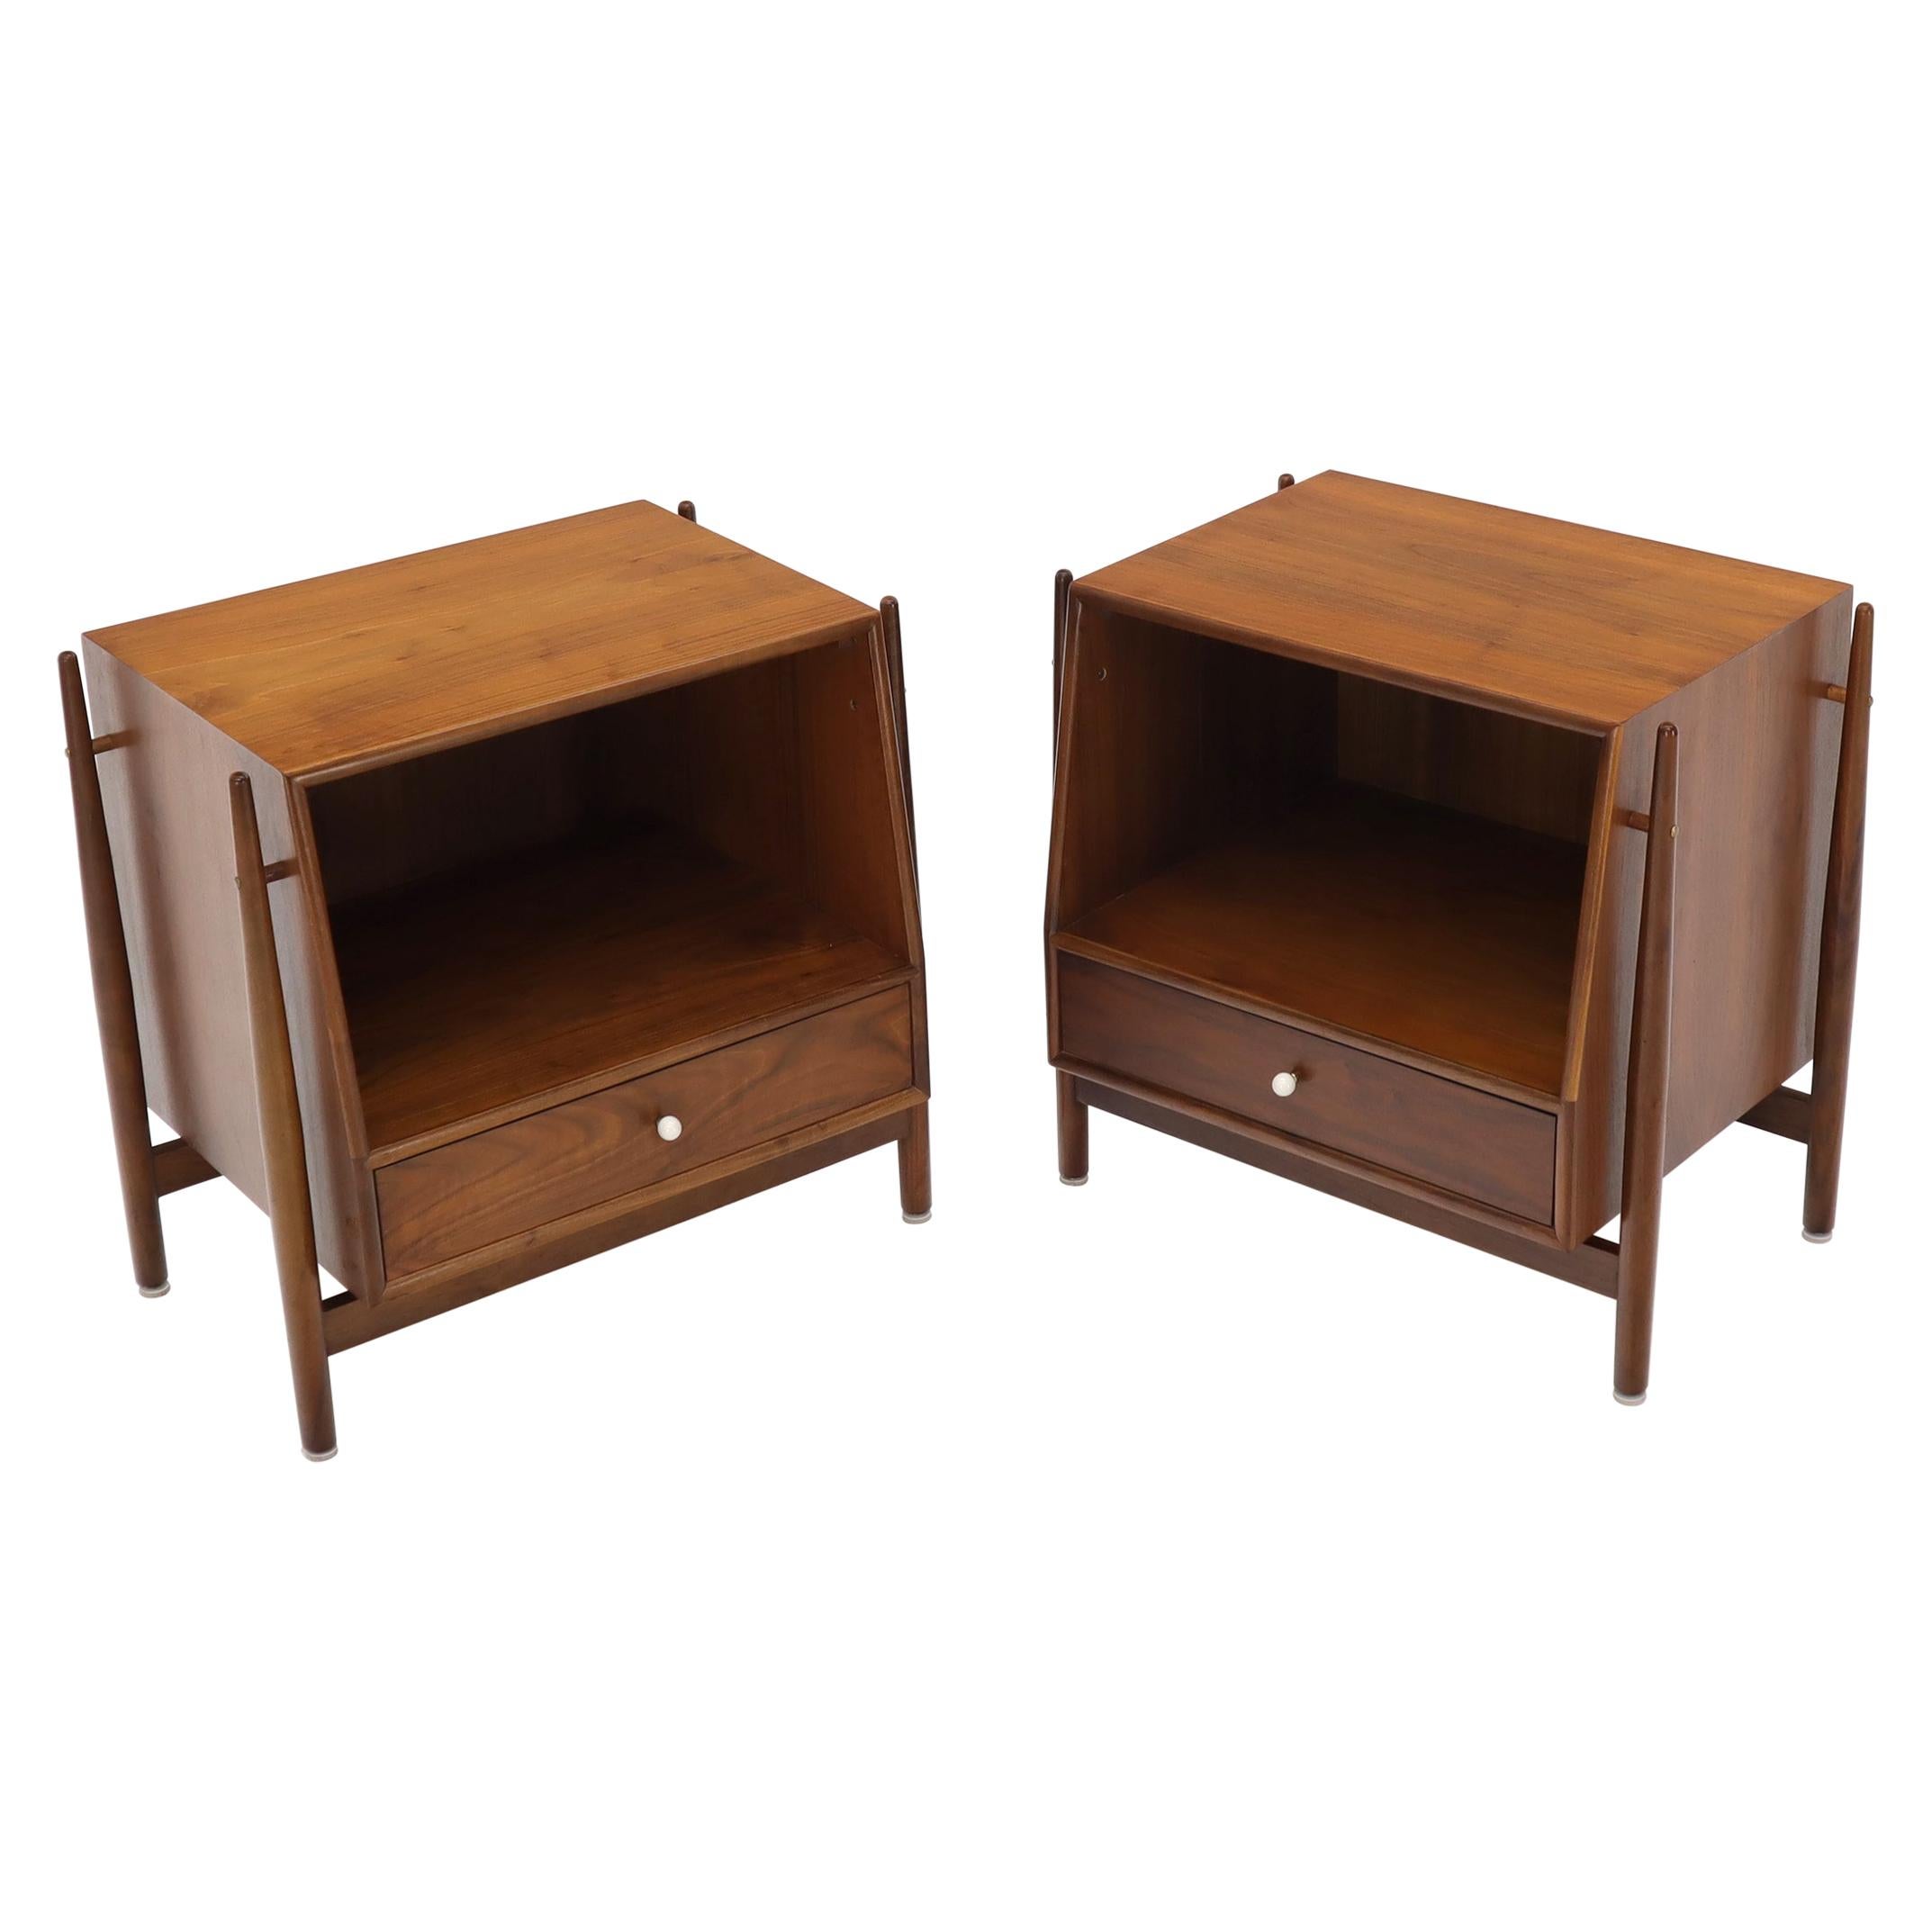 Pair of Walnut Mid-Century Modern End Tables Night Stands by Drexel